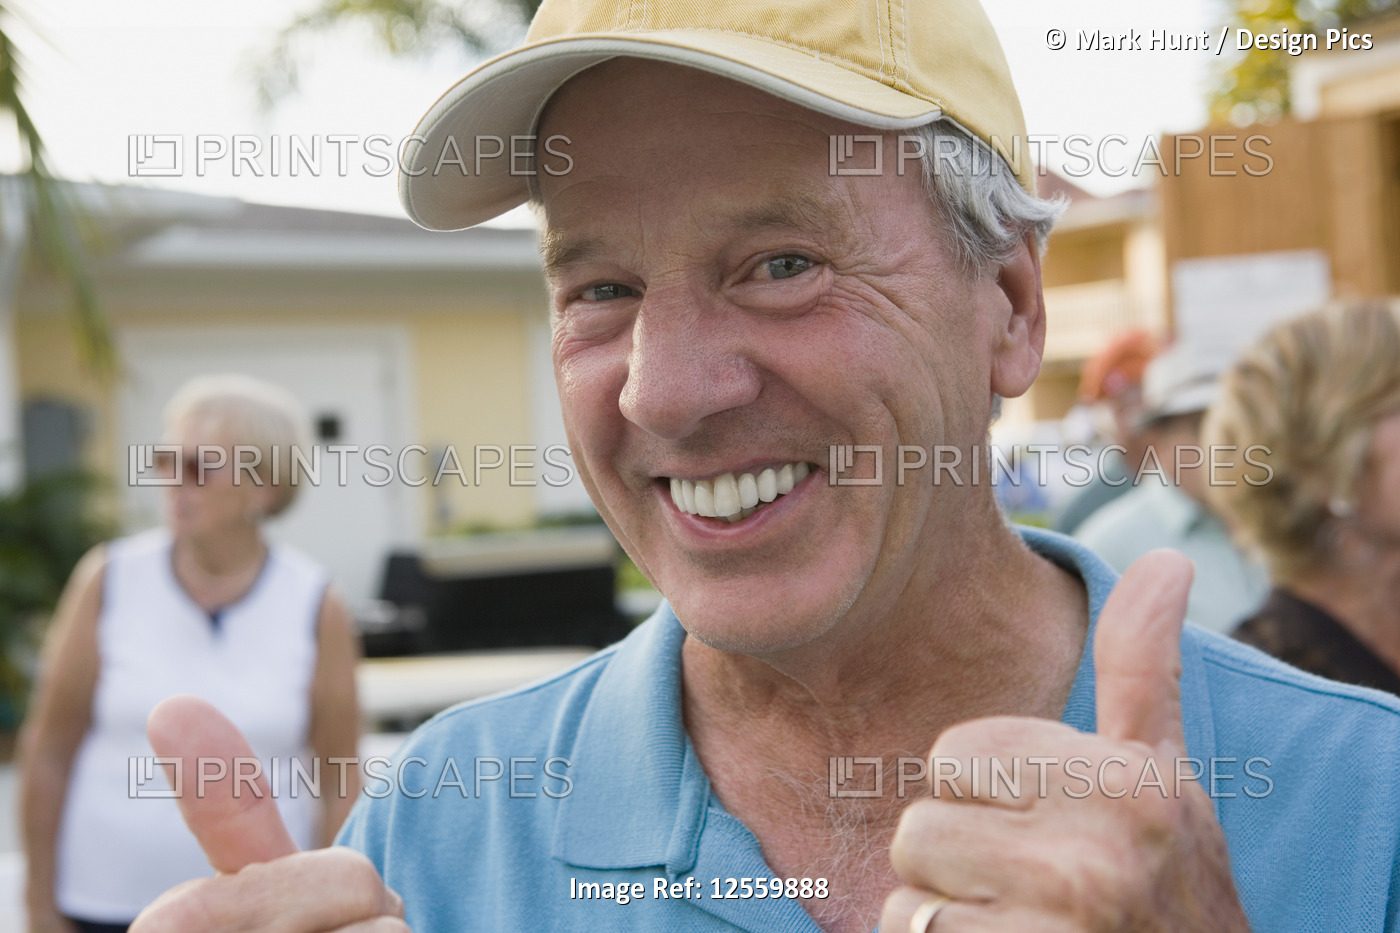 Portrait of a senior man showing a thumbs up sign and smiling